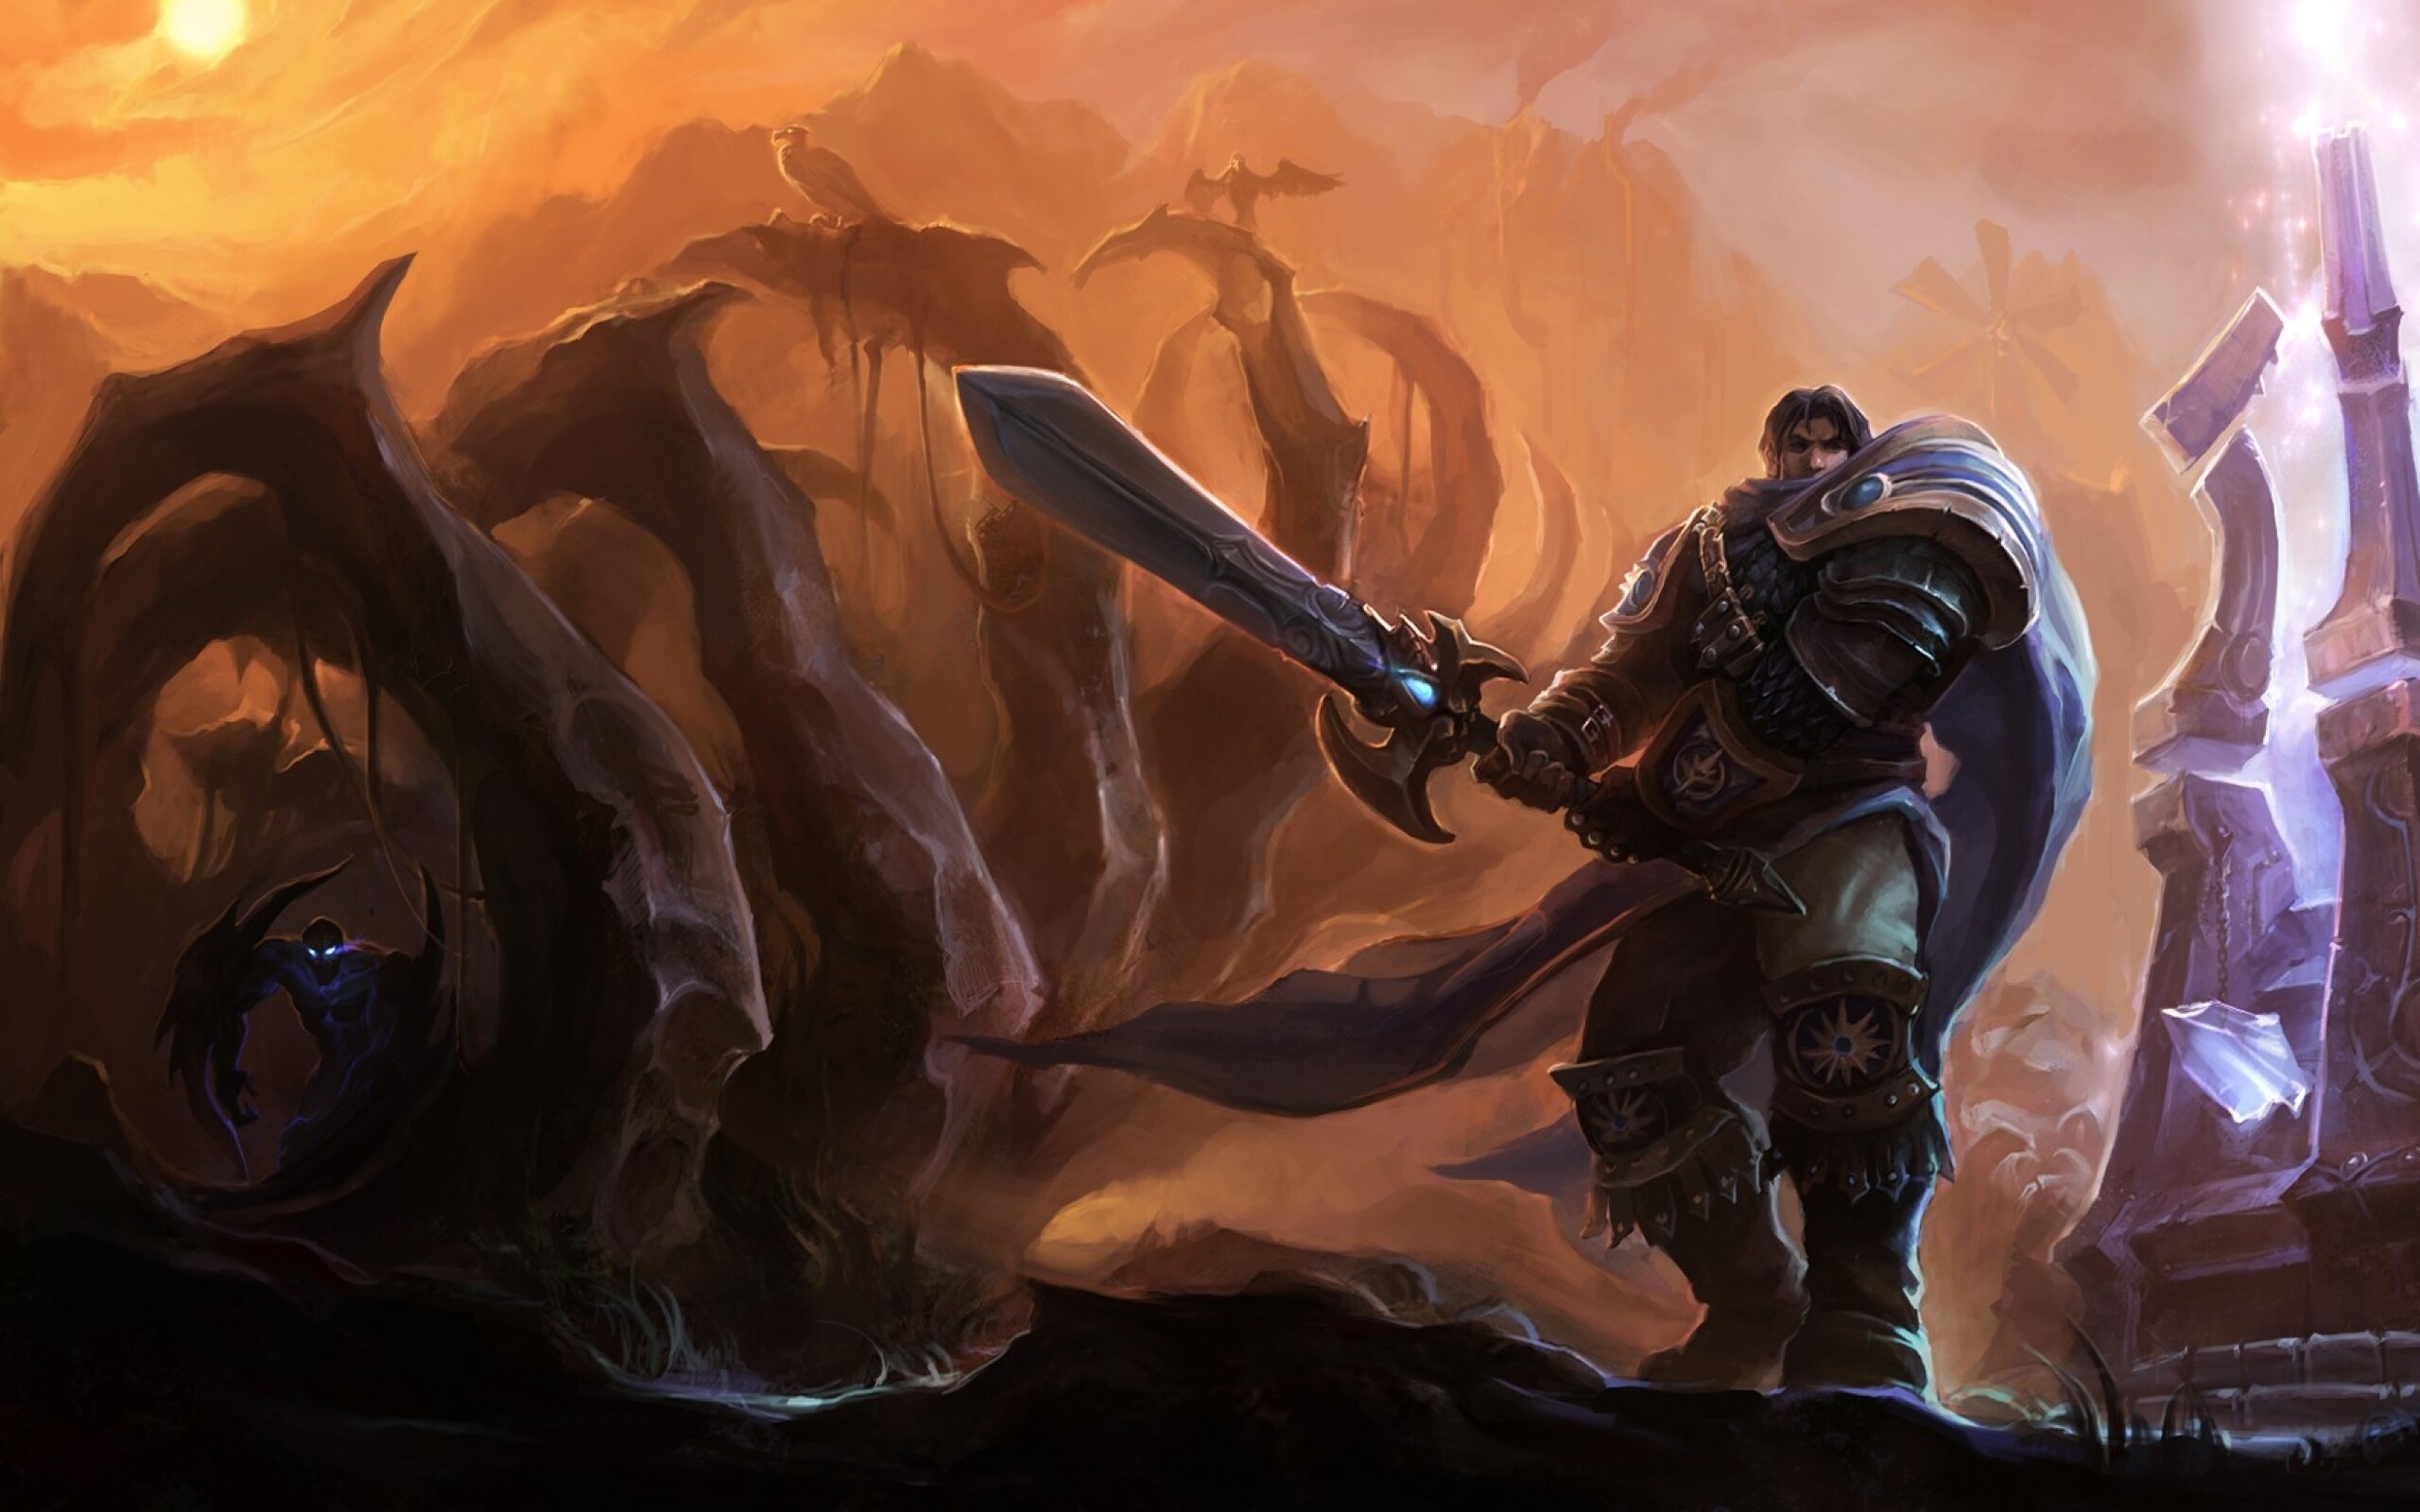 Garen: A noble order leader clad in magic-resistant armor and bearing a mighty broadsword, Fictional knight. 2560x1600 HD Background.